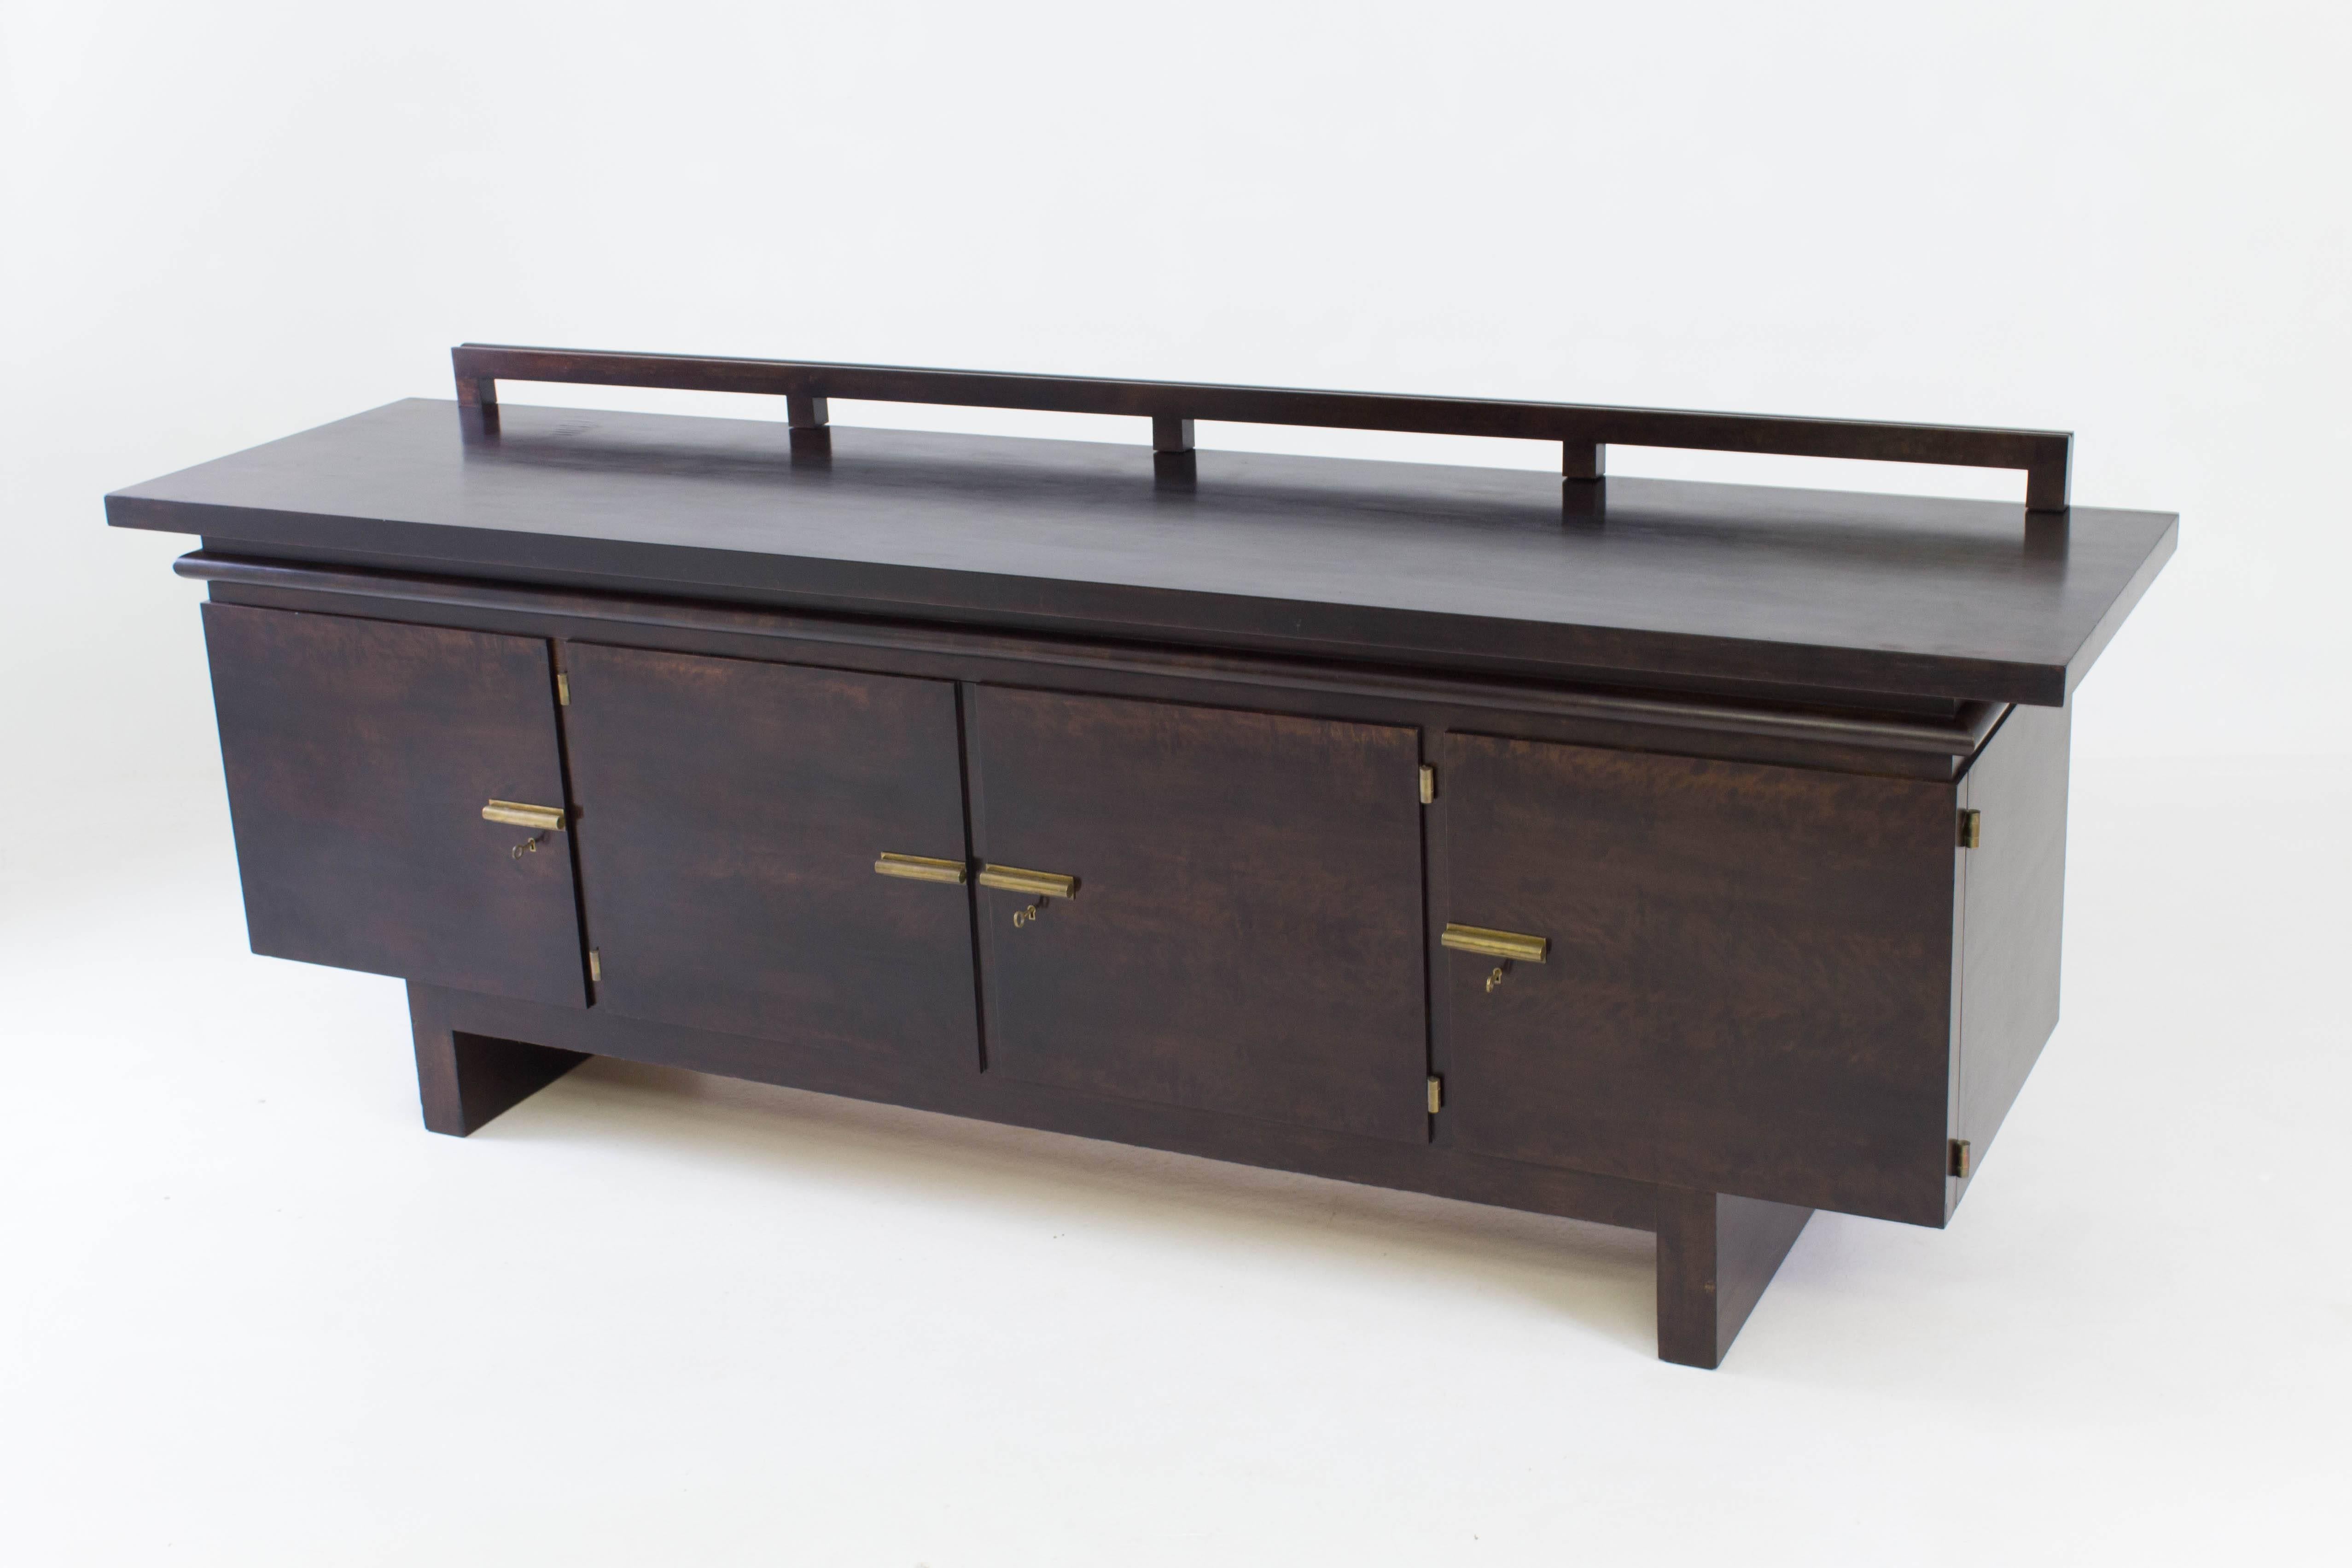 Rare Art Deco Bauhaus sideboard or credenza by Bruno Paul for Berliner Zoo
Werkstätten Berlin 1928.
Dark stained birch veneer with bronze fittings.
Minor veneer bubble on top, see image.
In good original condition with minor wear consistent with